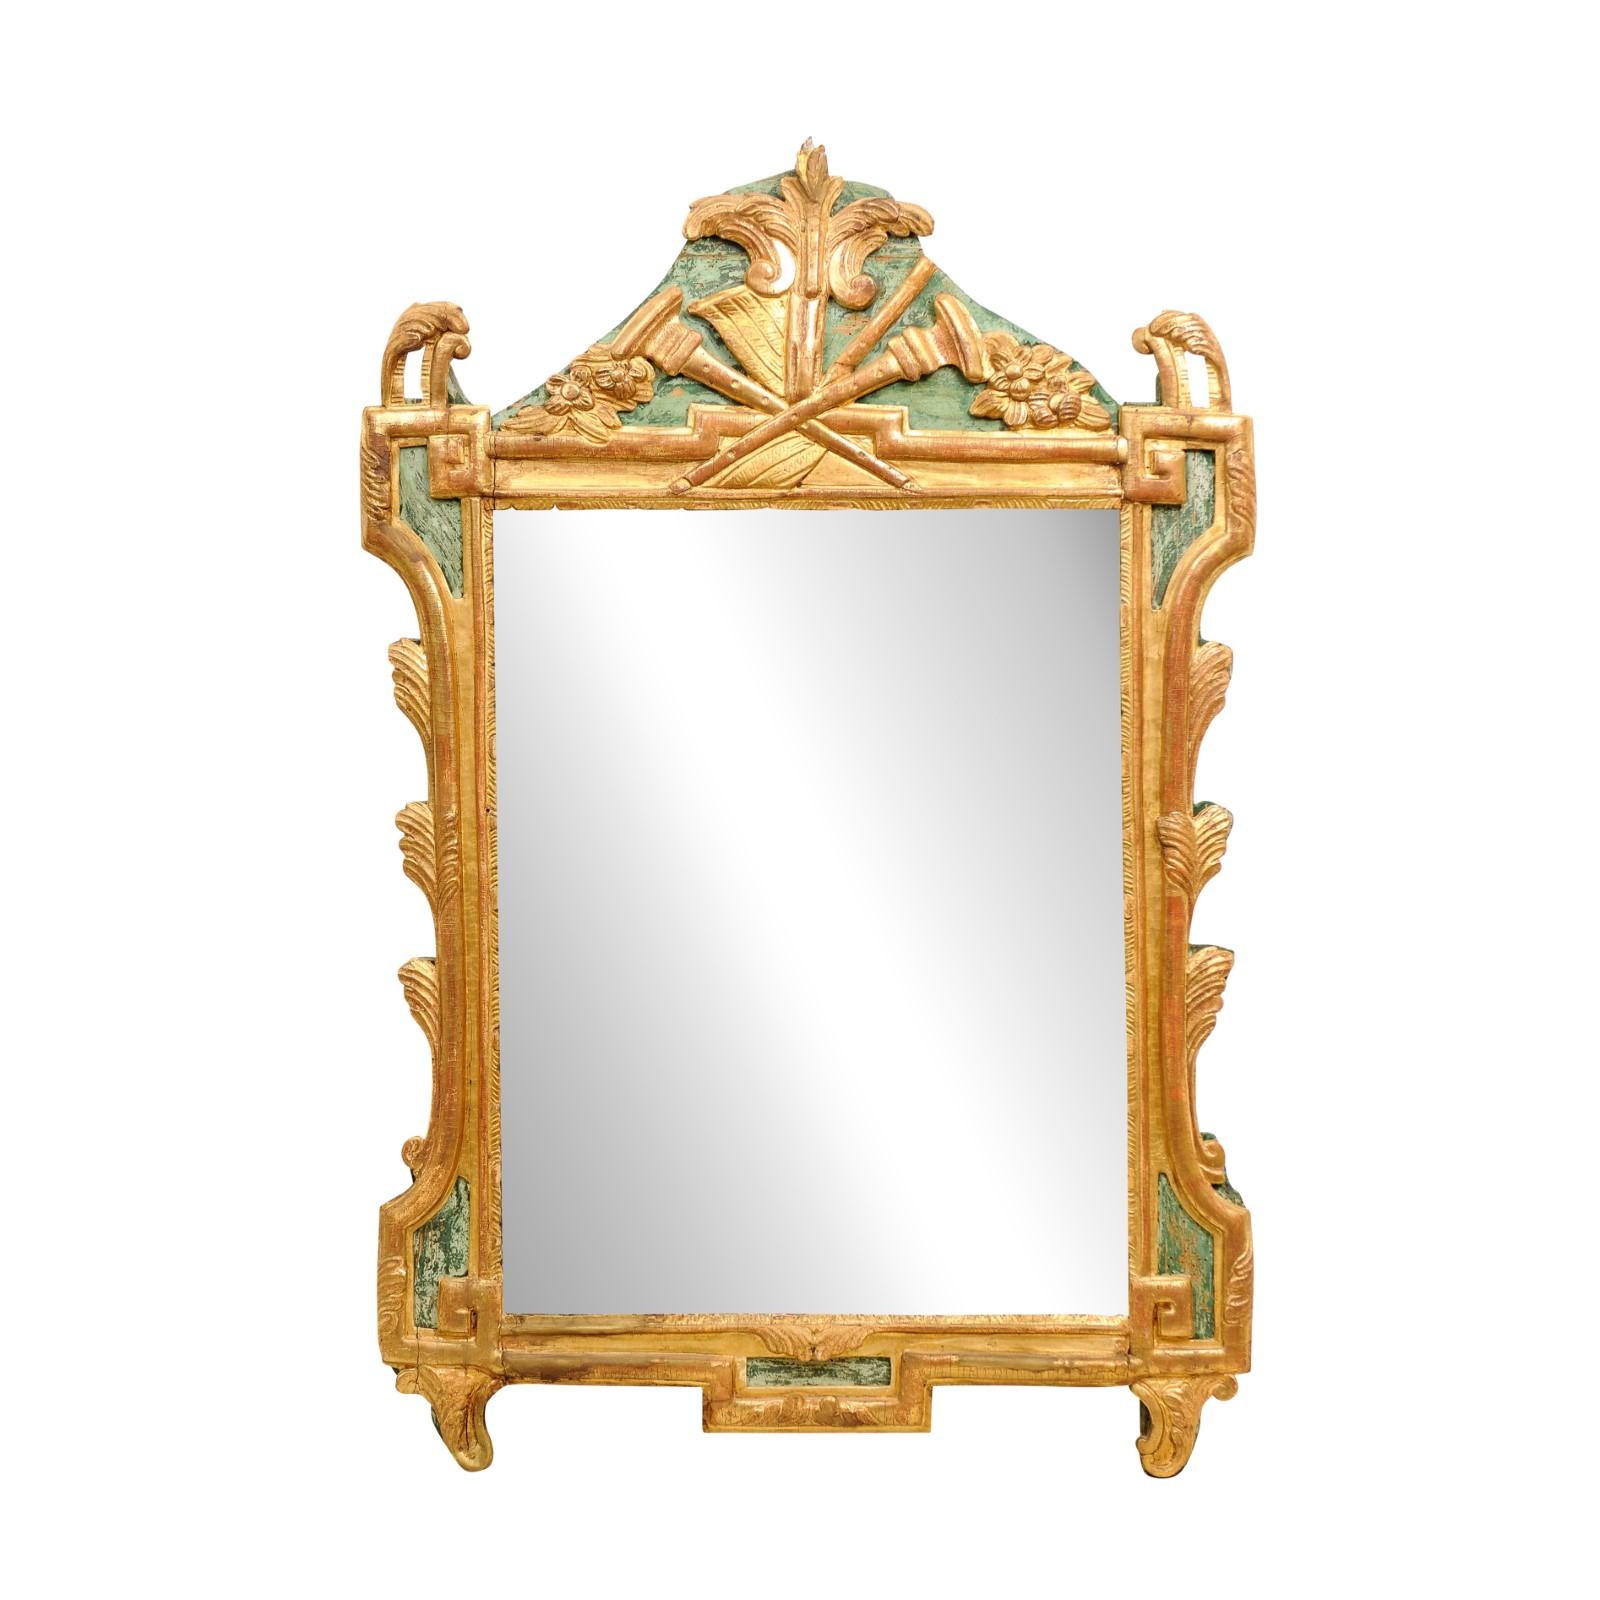 A French Louis XVI period painted and giltwood mirror from the 18th century with carved Liberal Arts Allegory symbolized by musical instruments and scores. From the era of exquisite design and impeccable craftsmanship, this 18th-century French Louis